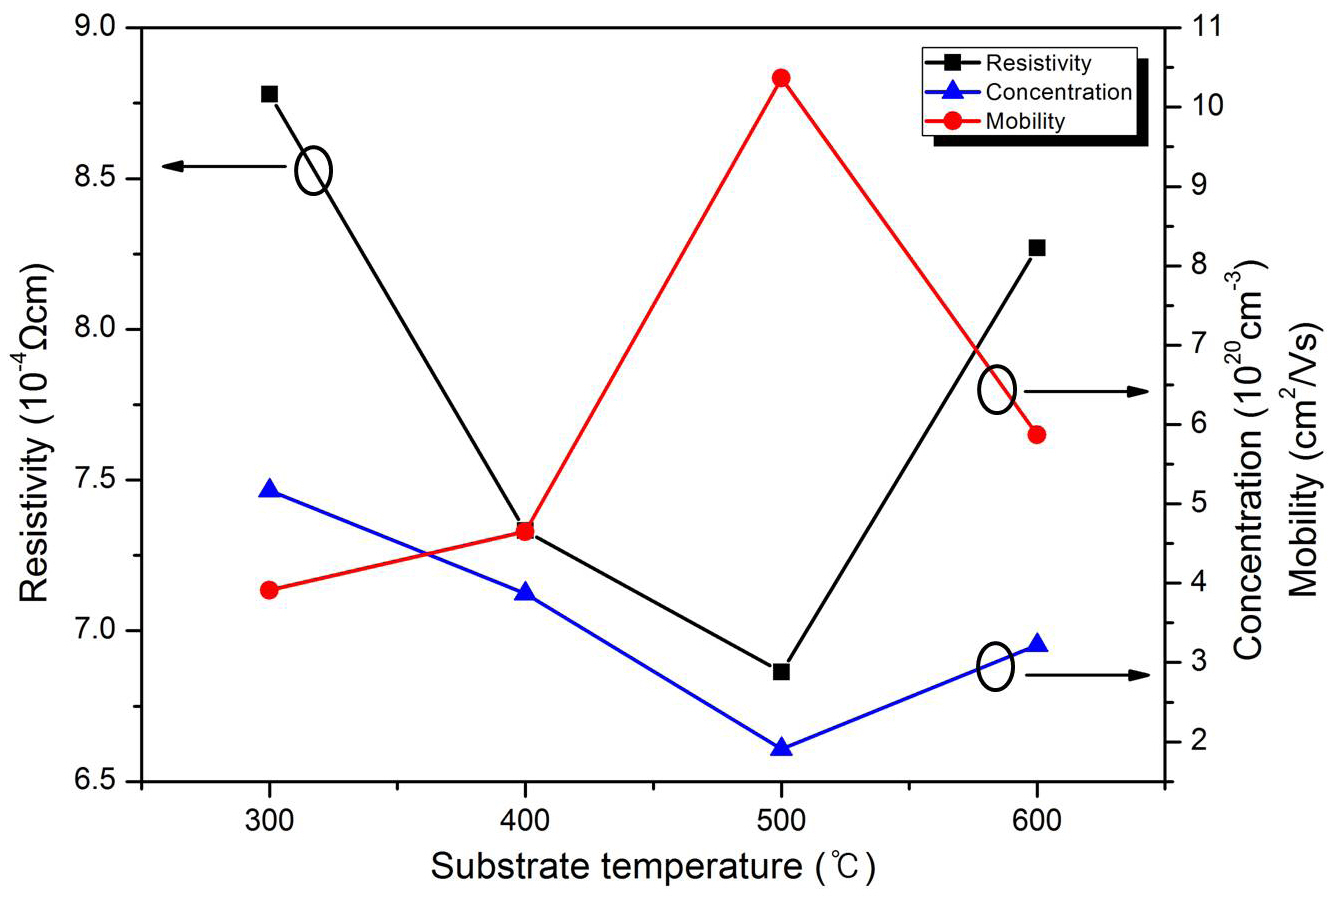 The electrical properties of the AZO:H2 films deposited in various substrate temperatures (working pressure: 7 mTorr).